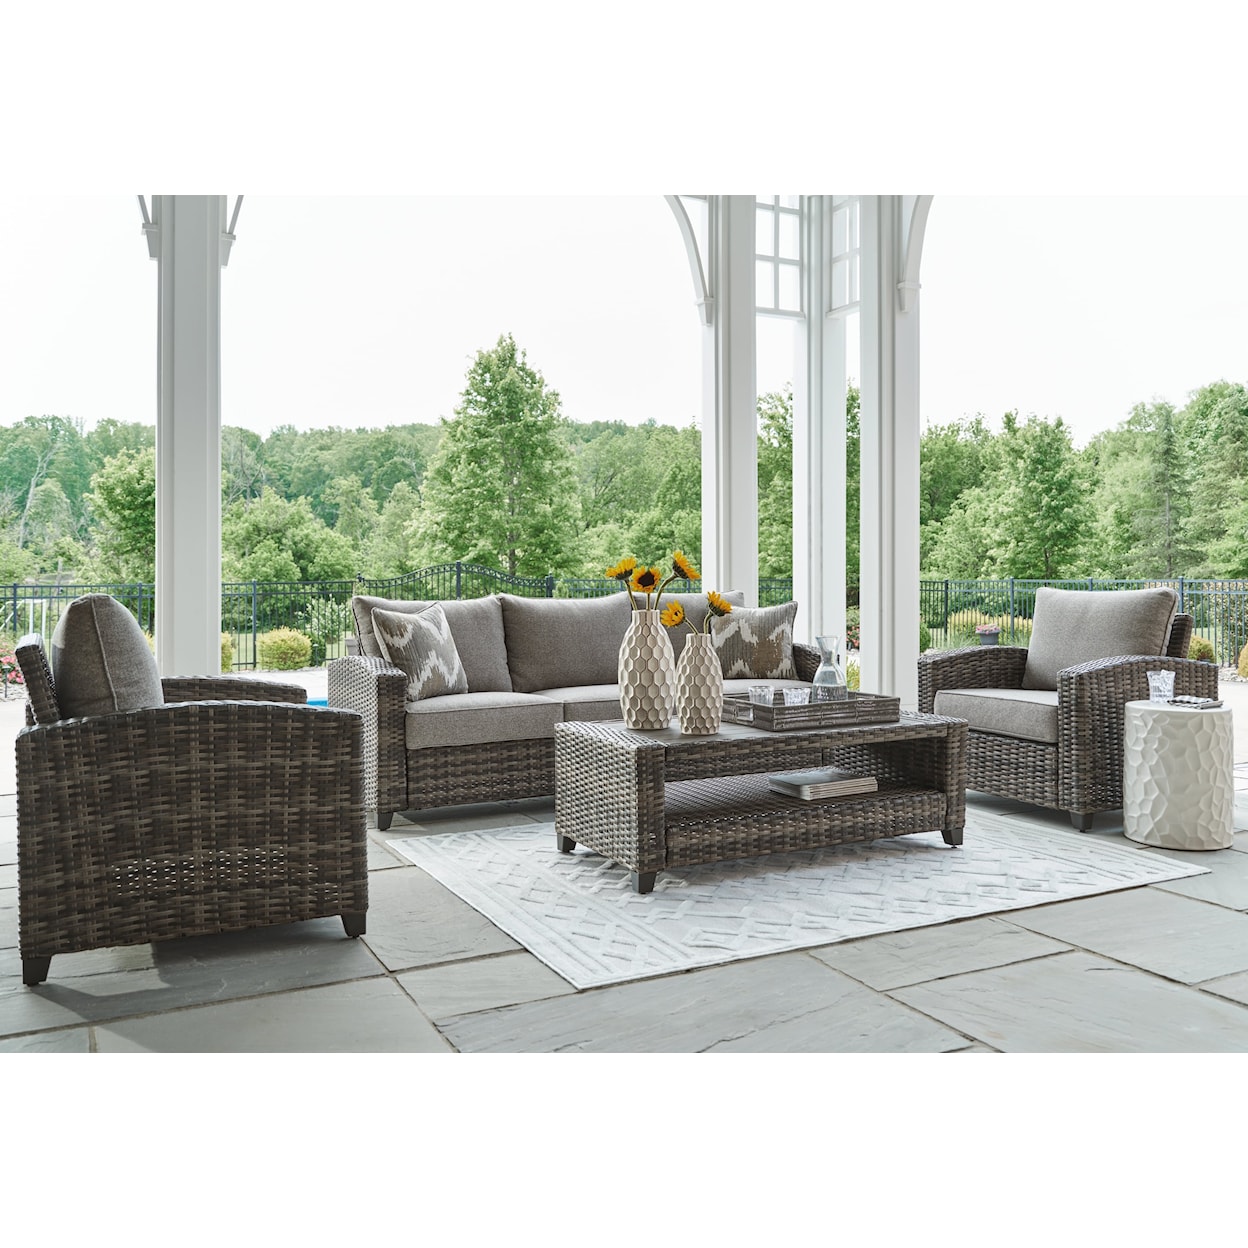 Benchcraft Oasis Court Outdoor Sofa/Chairs/Table Set (Set of 4)